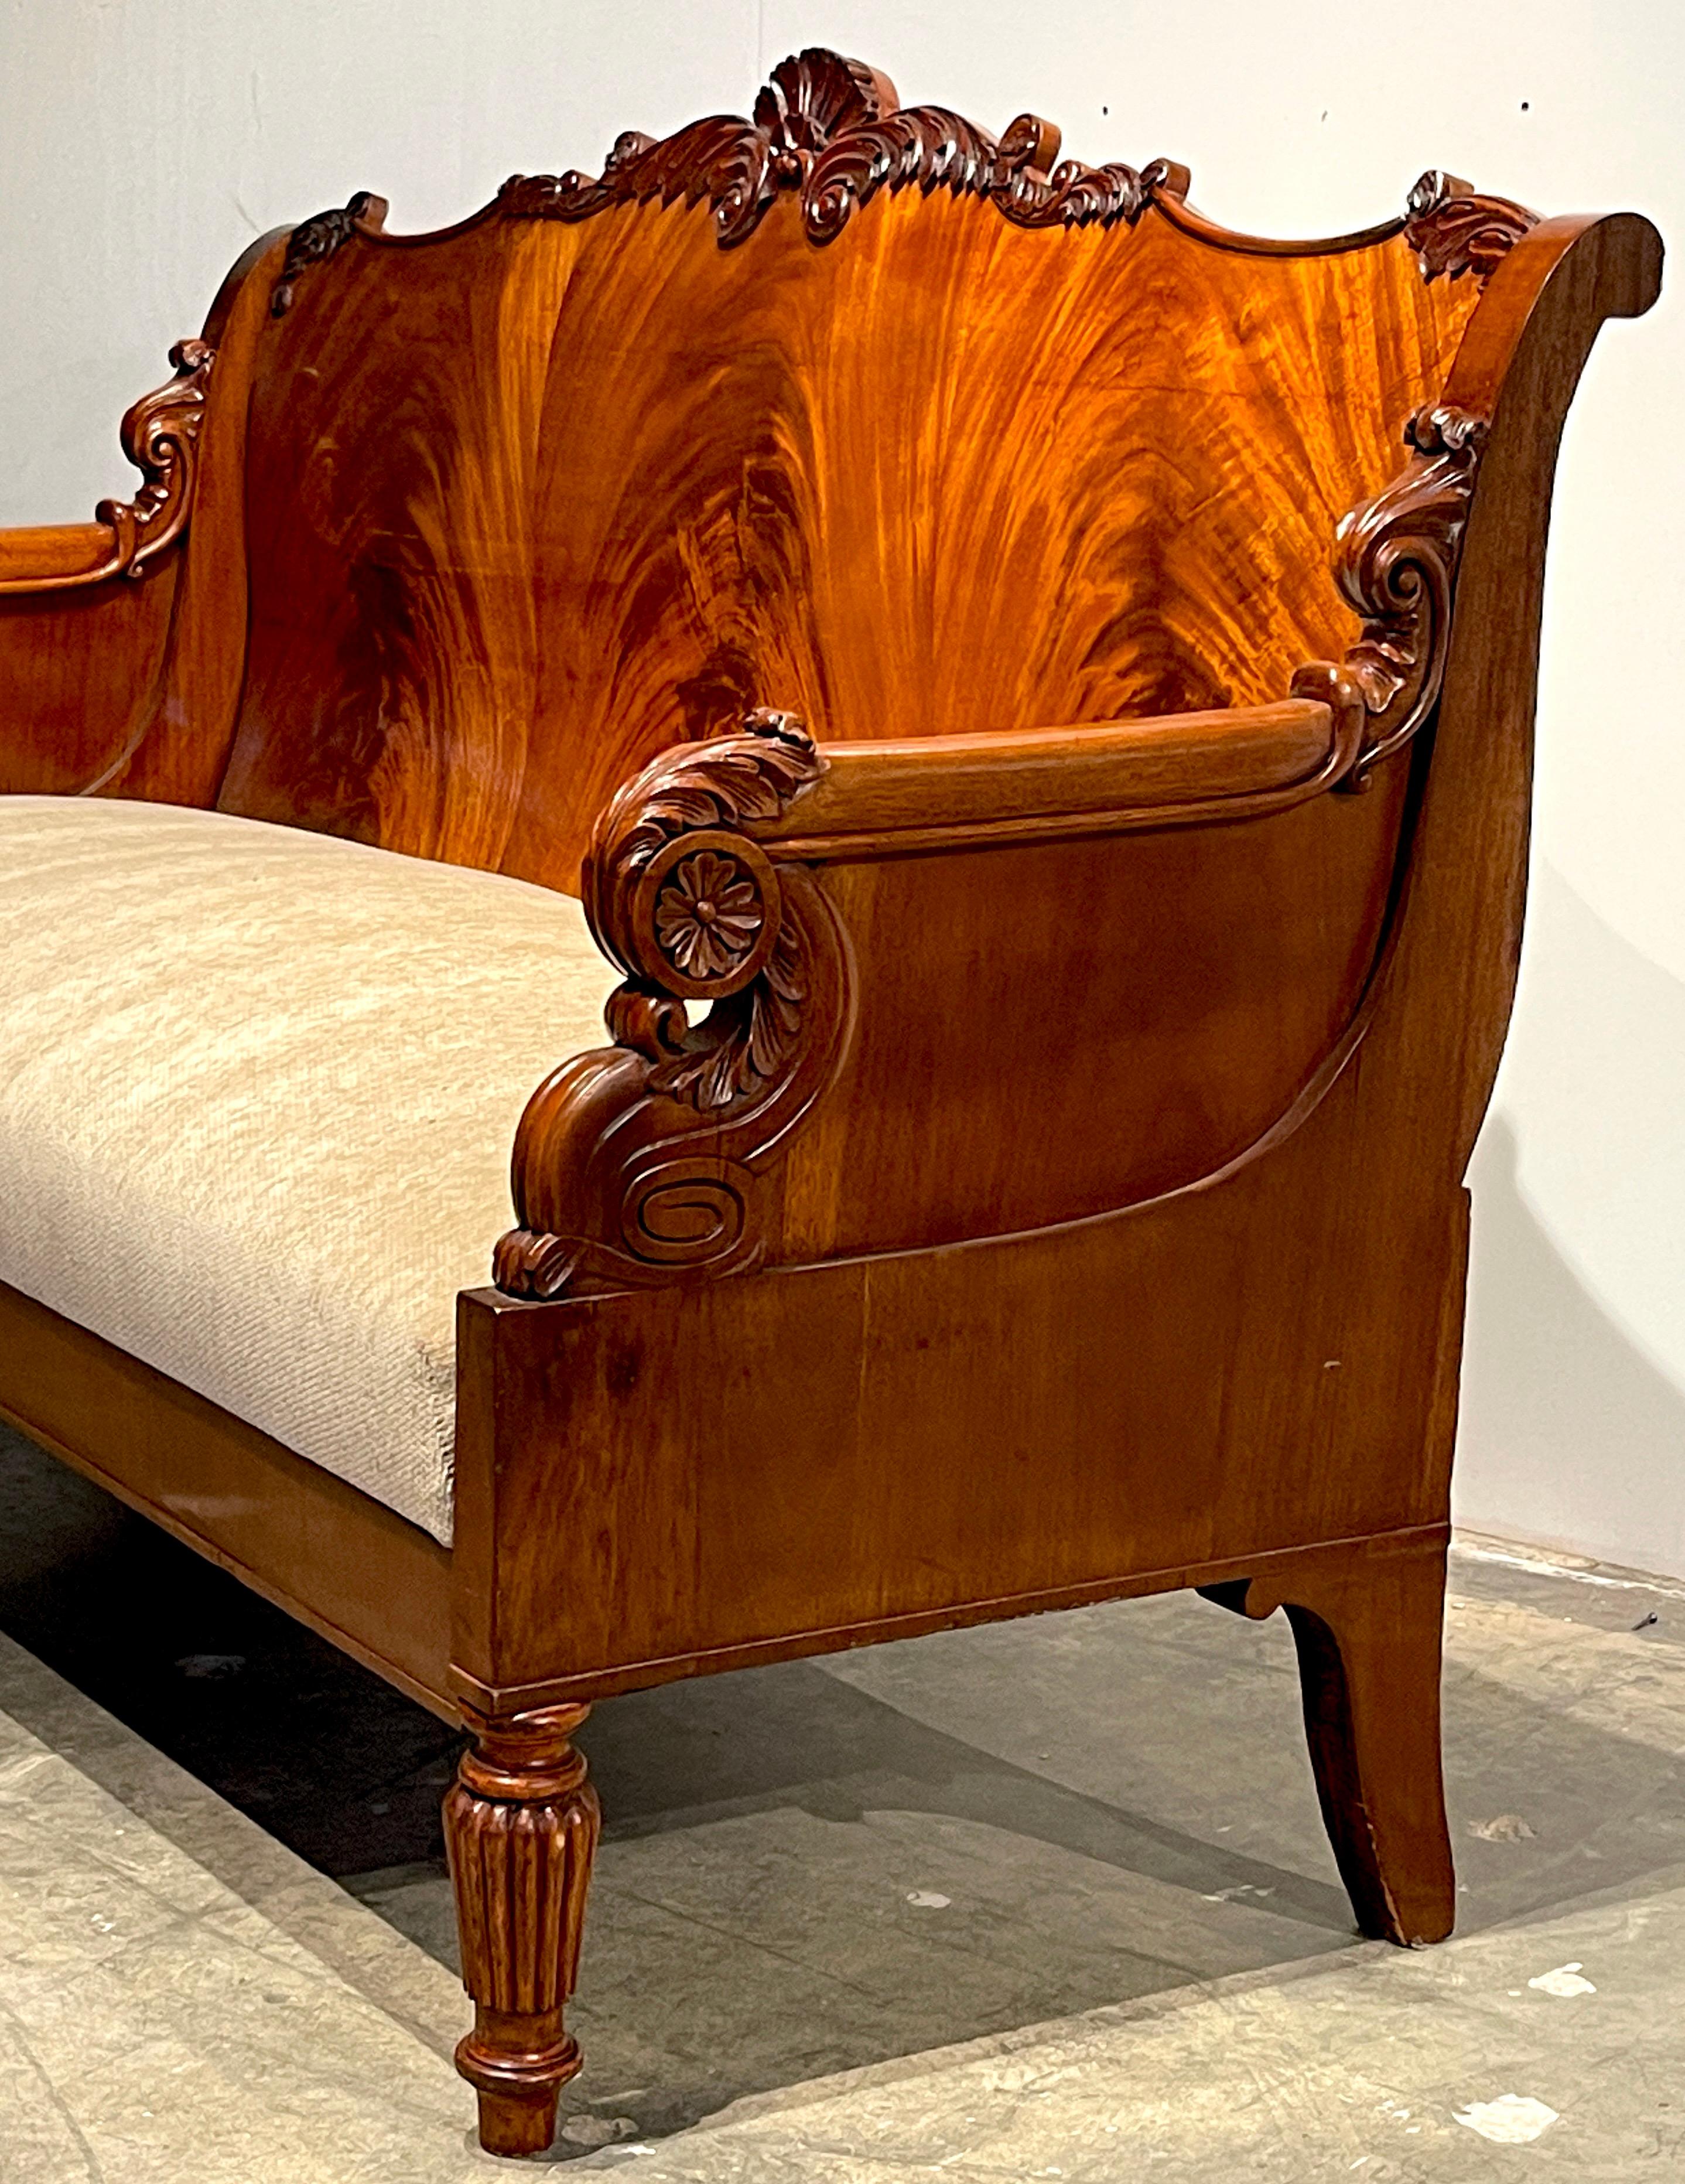 Upholstery 19th Century Russian Neoclassical Flame Mahogany Sofa  For Sale